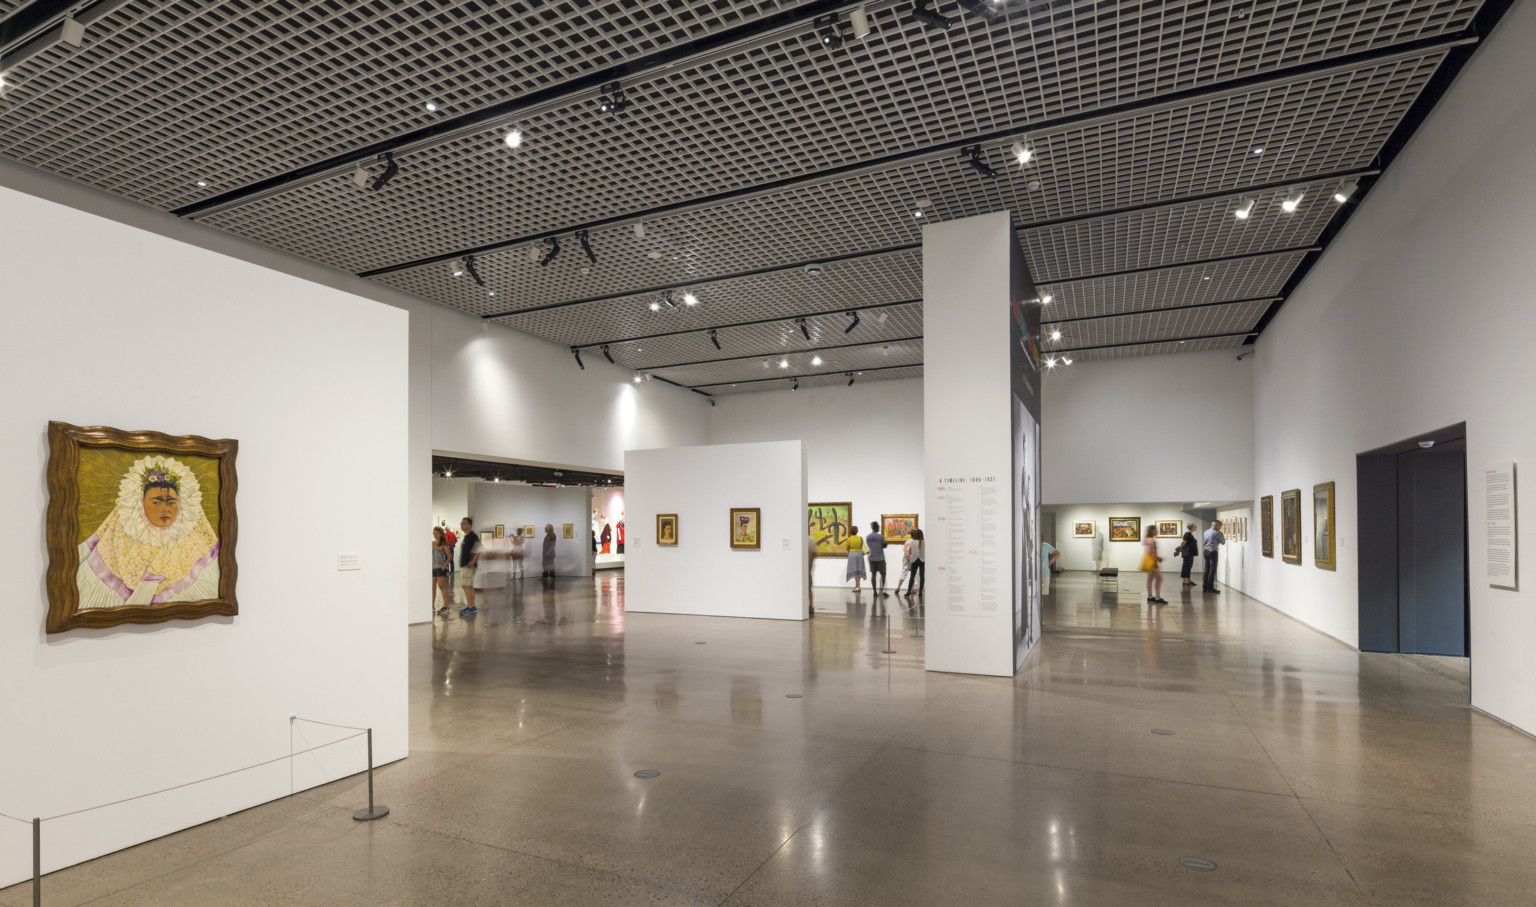 A steel grid with light fixtures hanging off spans the ceiling above a white gallery with paintings on the walls